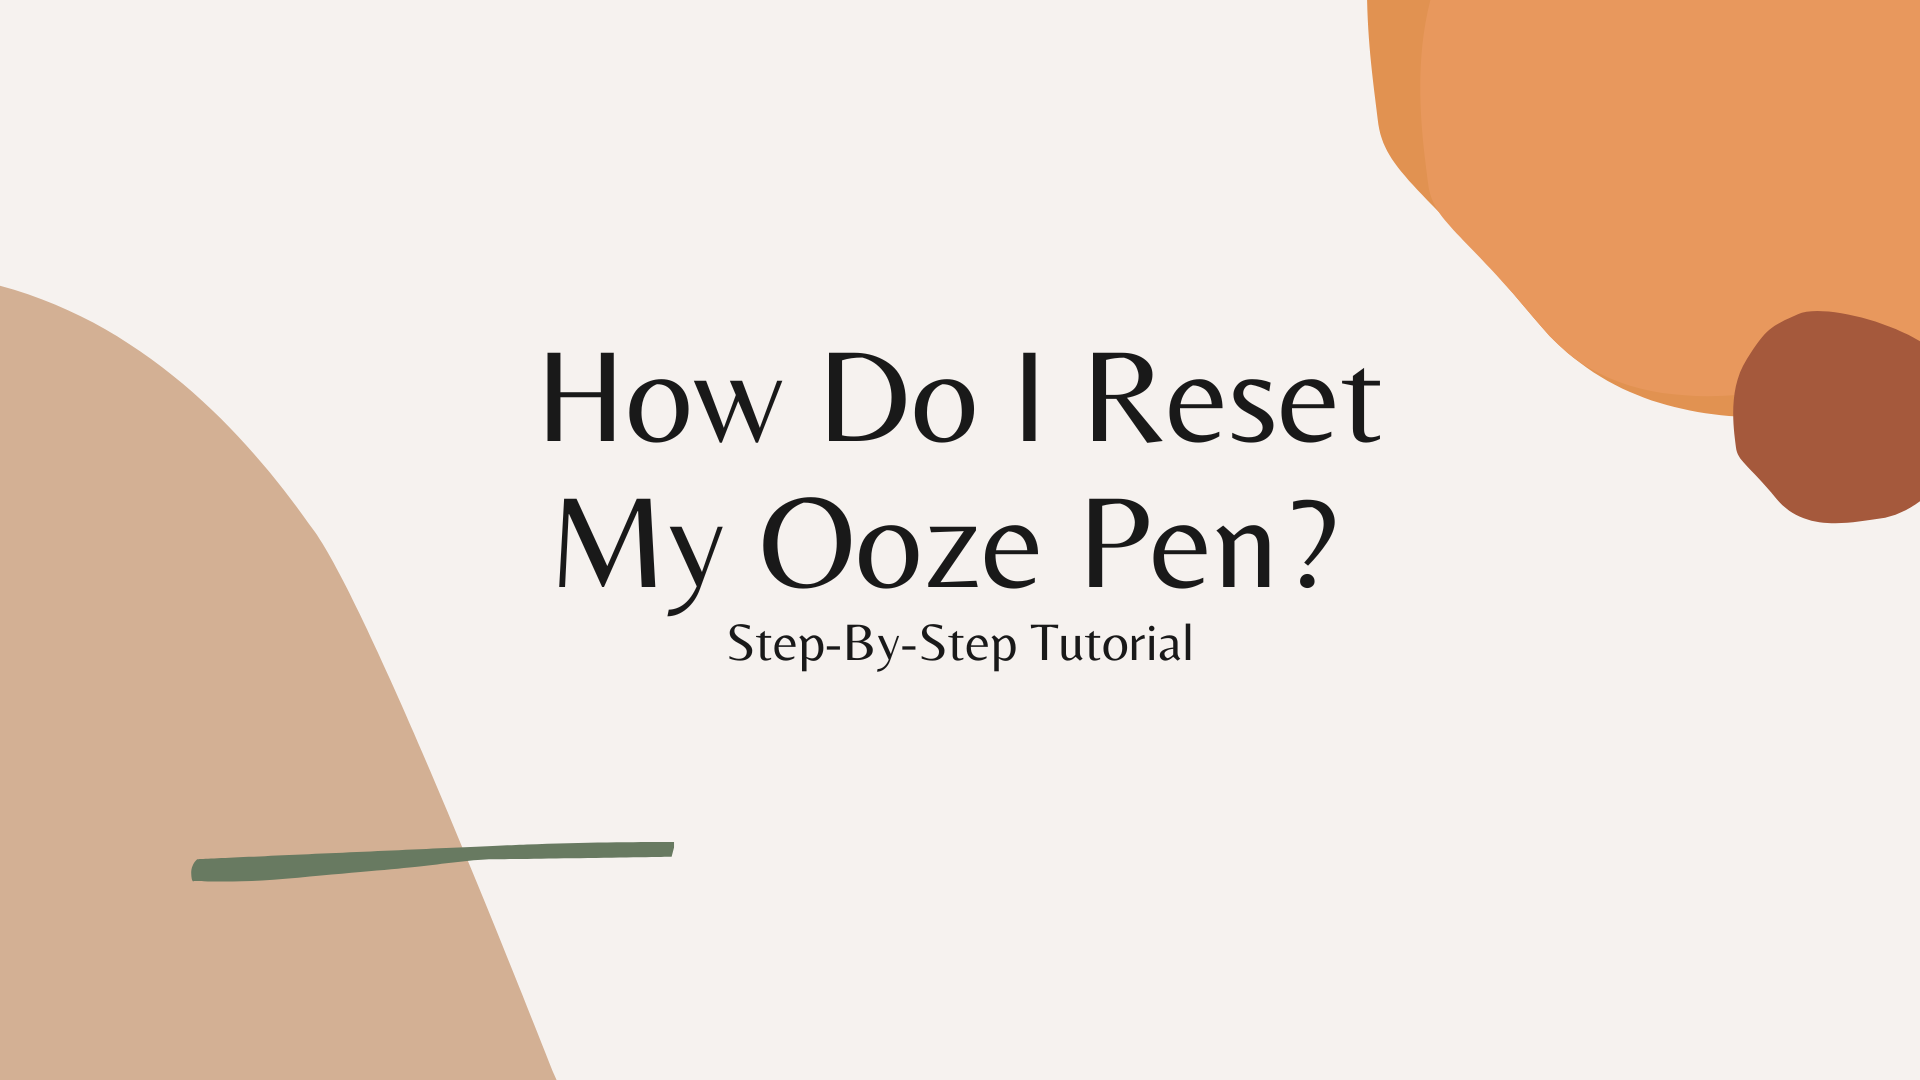 How Do I Reset My Ooze Pen? Step-By-Step Tutorial